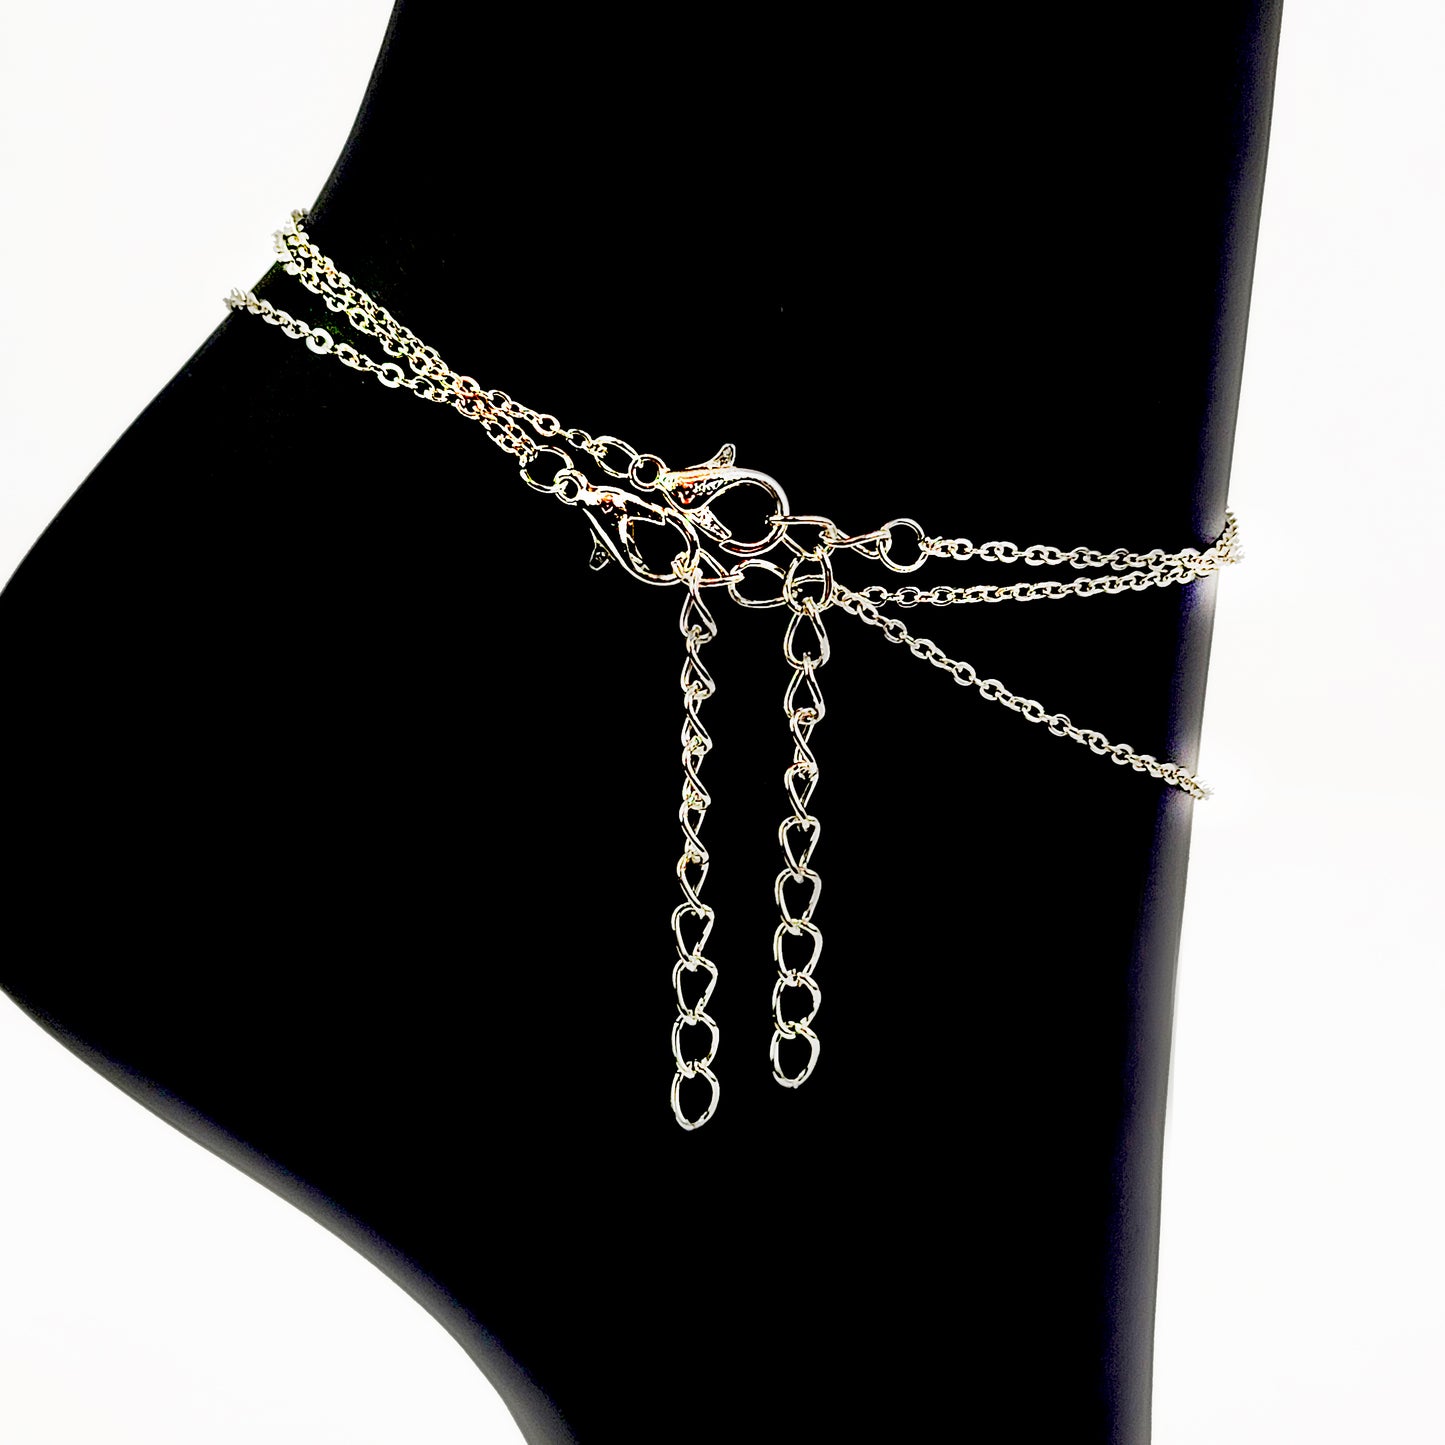 Sexy Silver or Gold Multi Chained Star and Pineapple Anklet